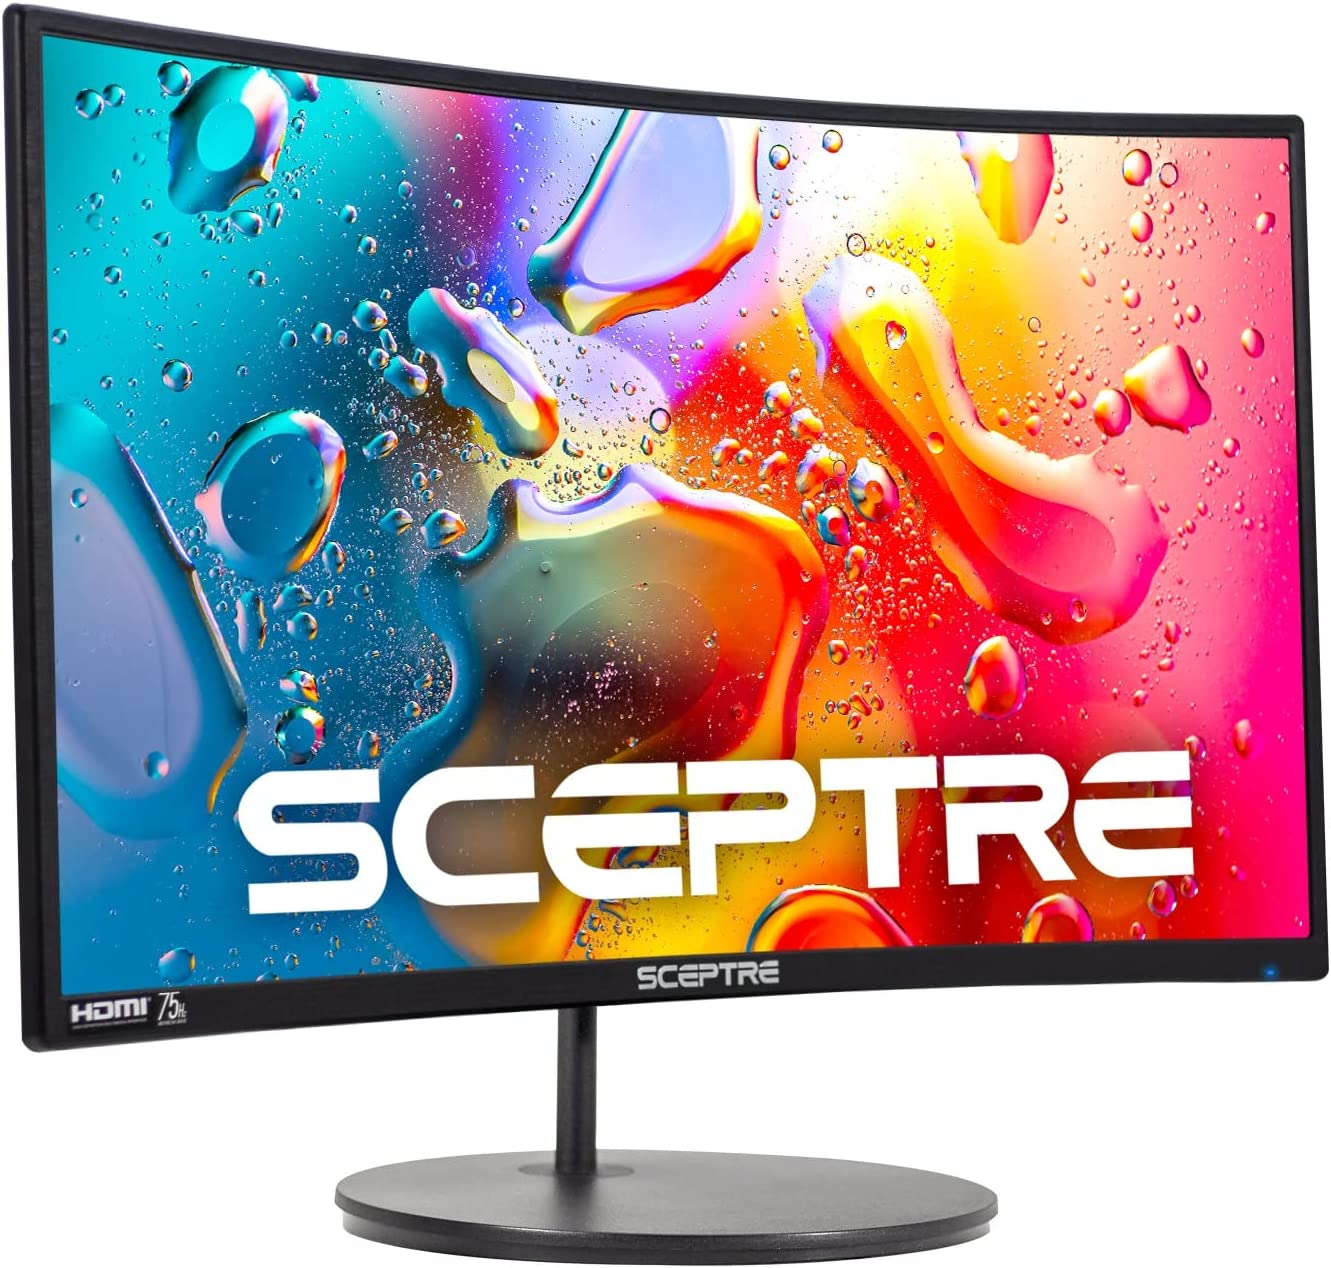 Sceptre 24-Inch Curved 75Hz Gaming LED